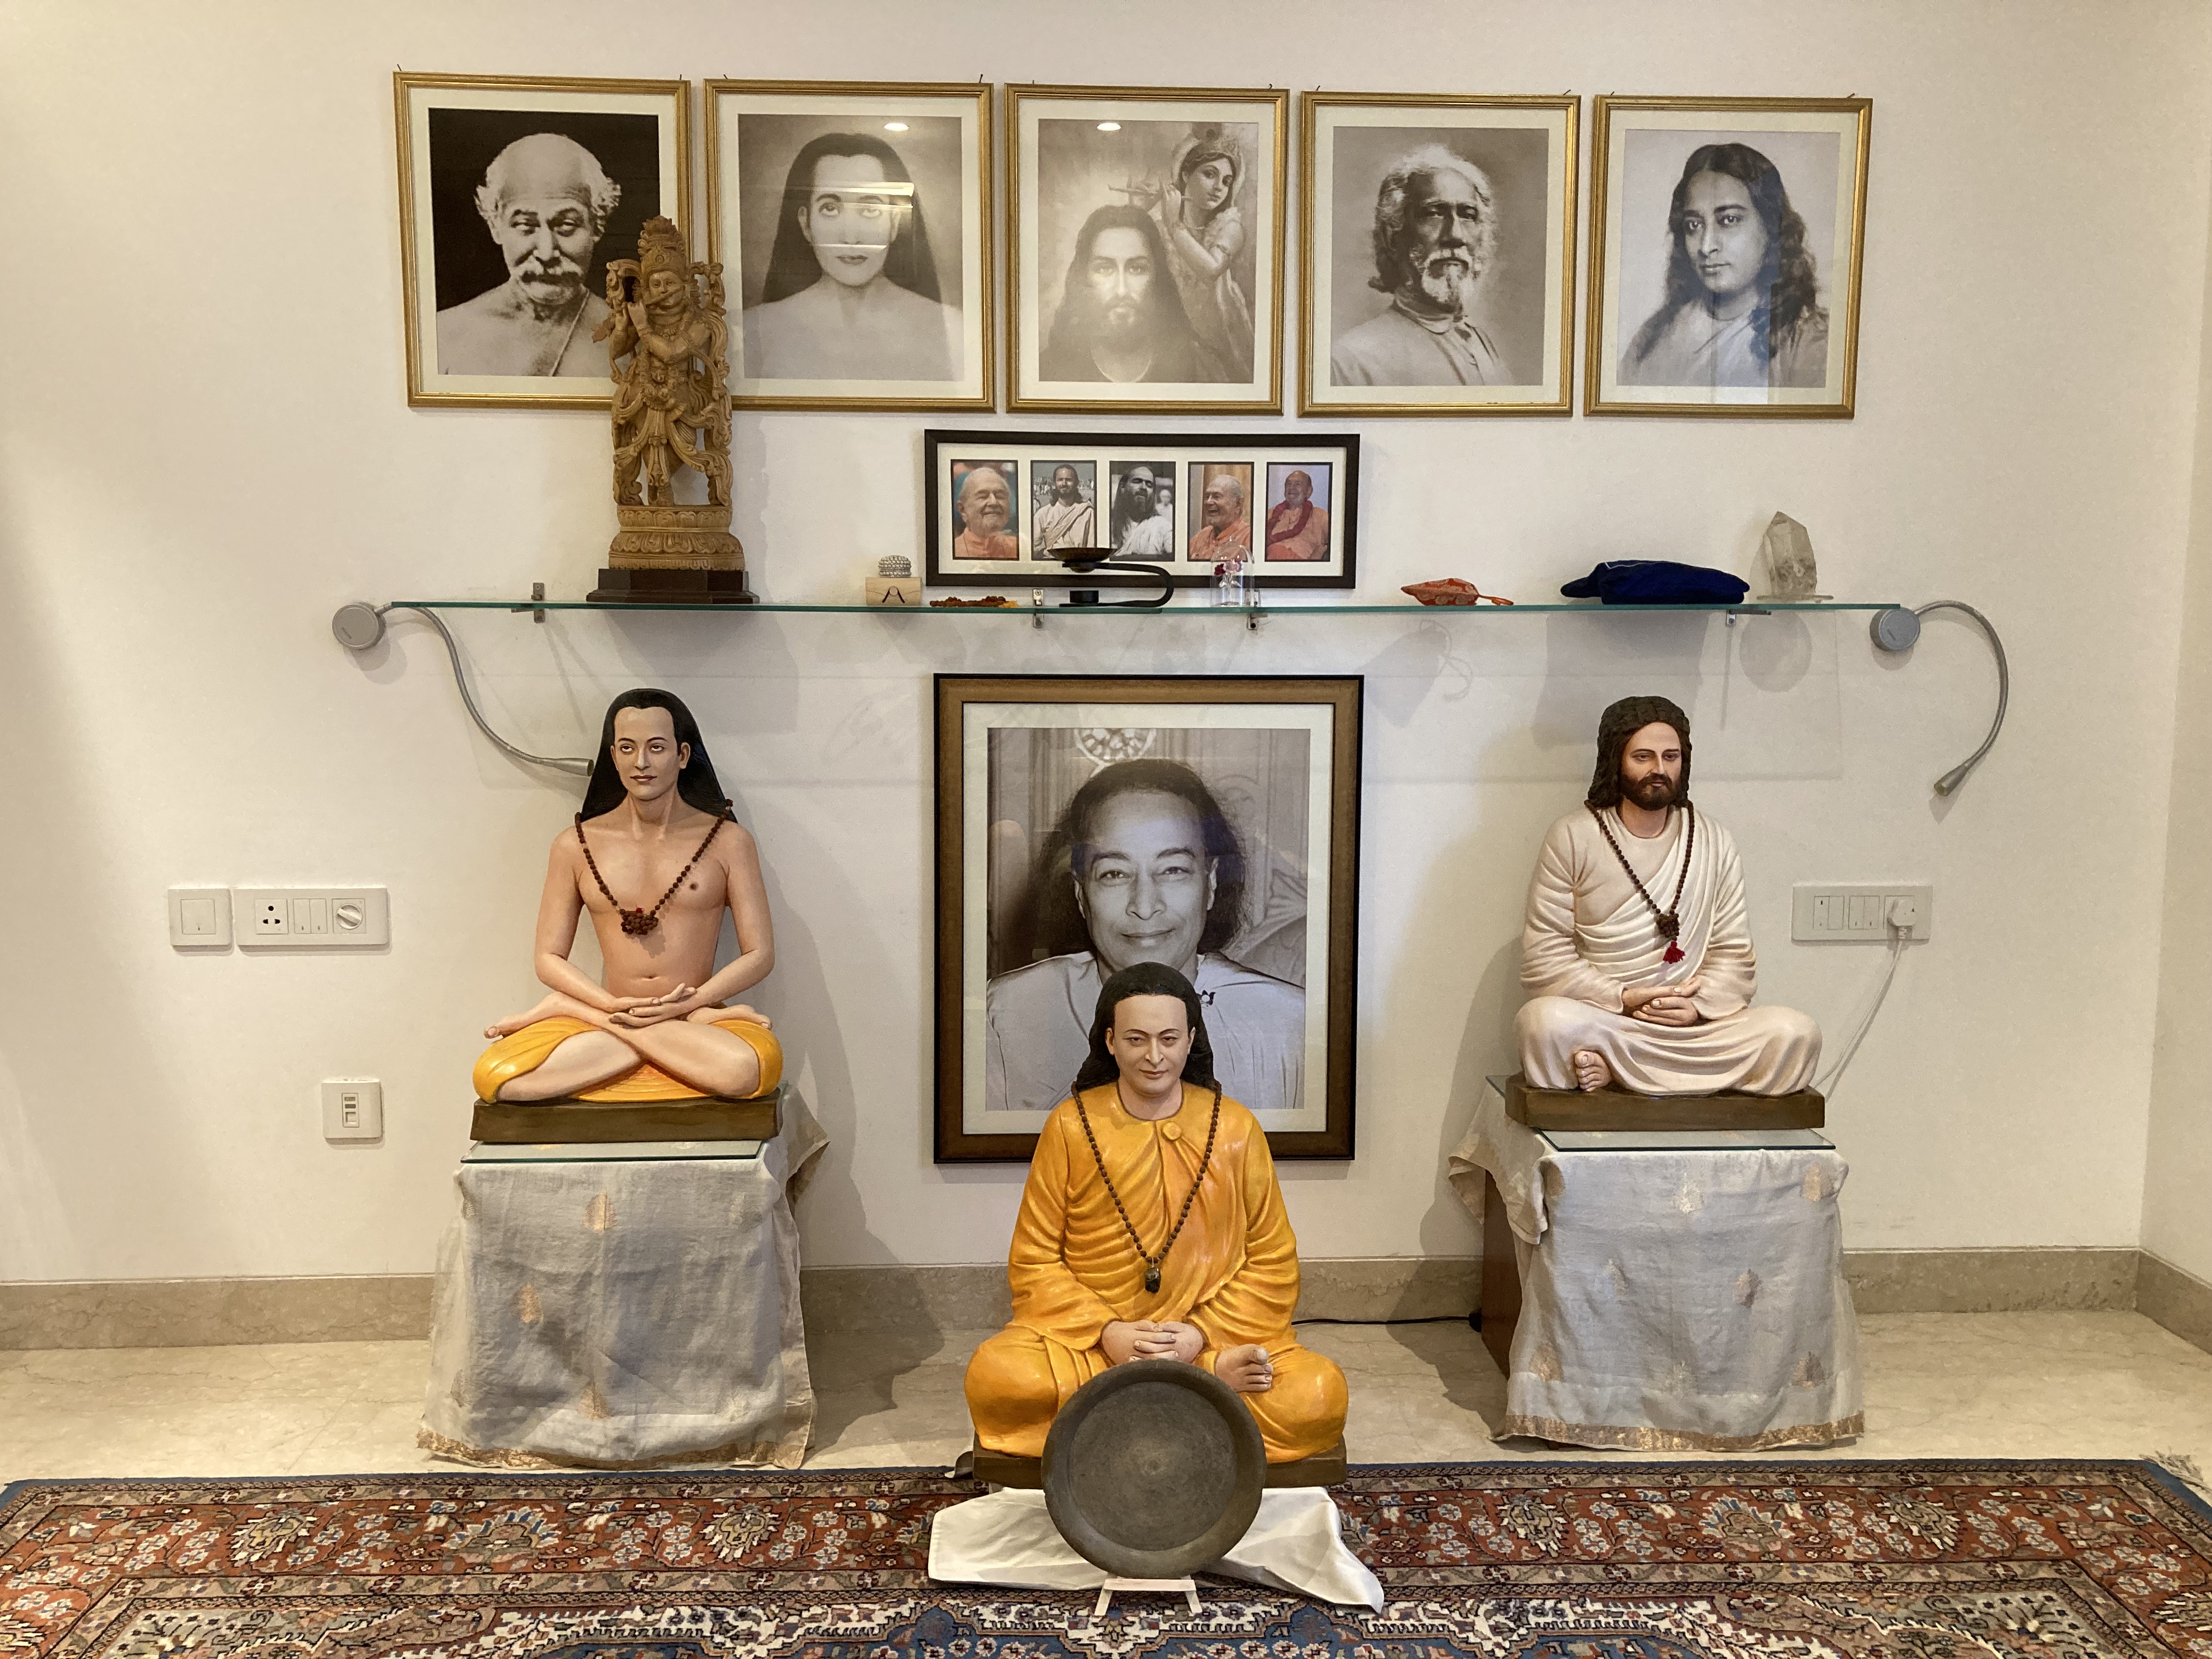 jyotish and devi altar in delhi india with yogananda sacred plate from ghosh family india